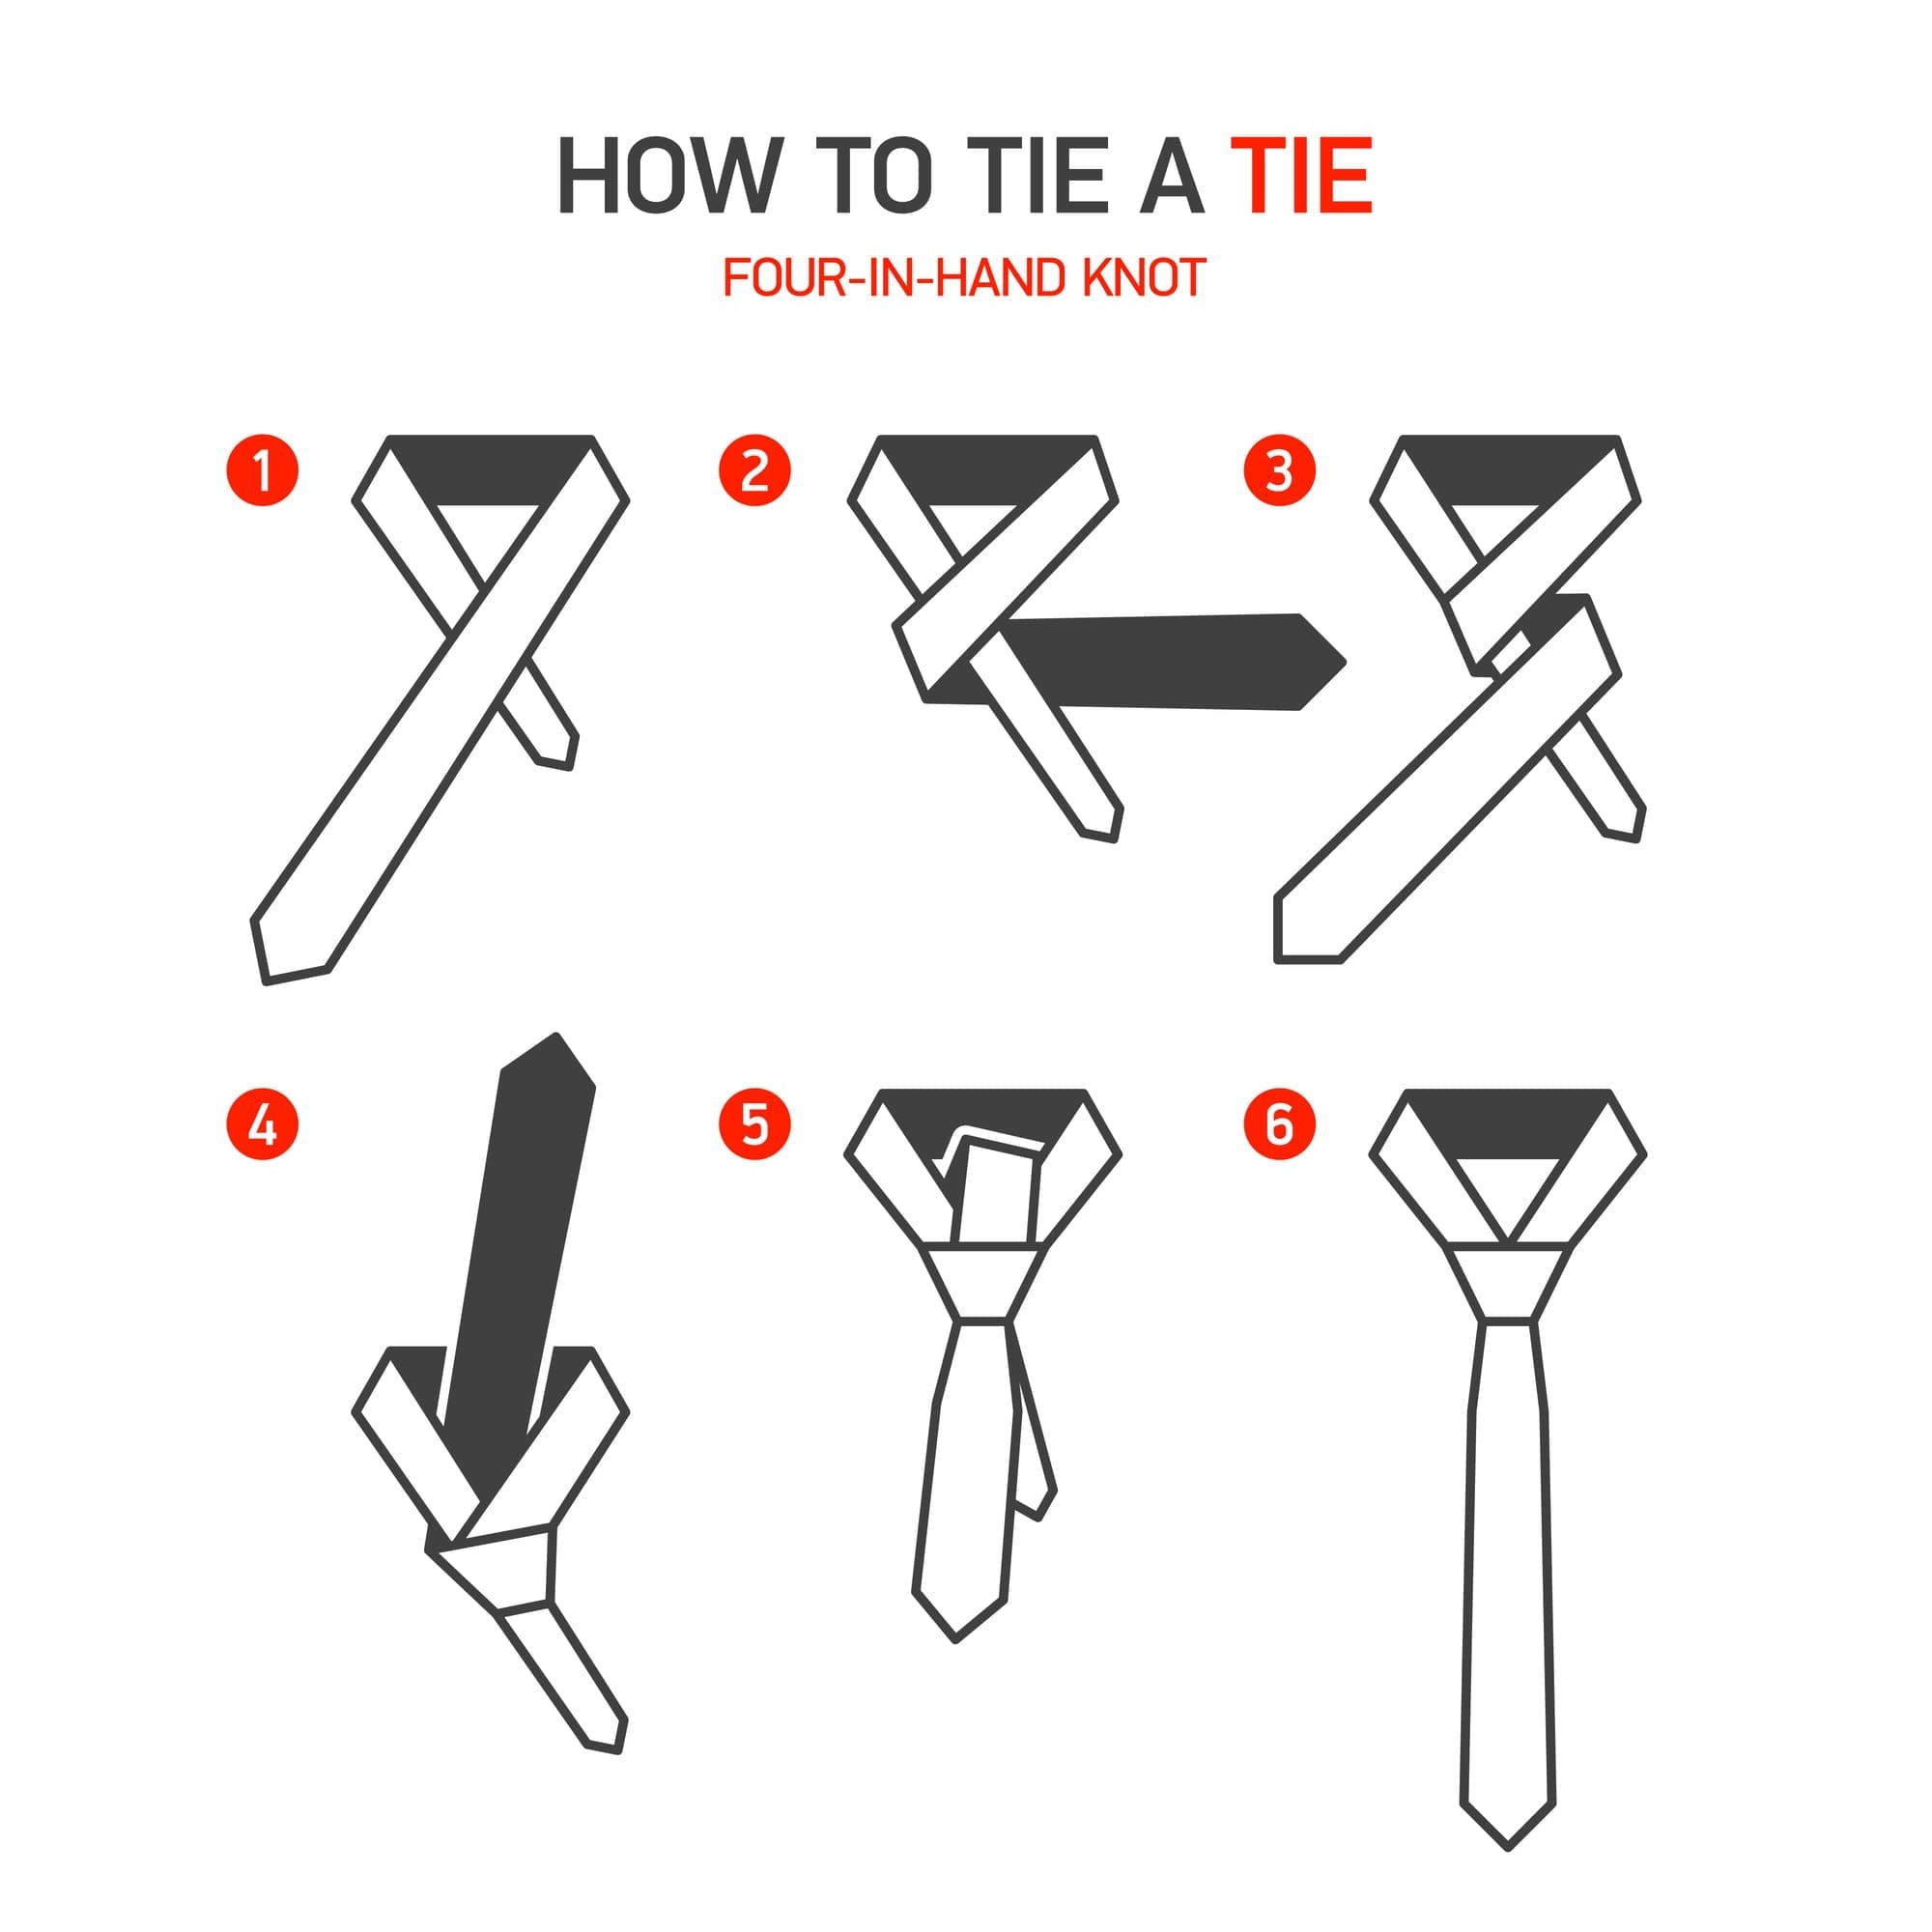 Men's Tie Guide Types of Ties, How to Tie Them and When to Wear Them